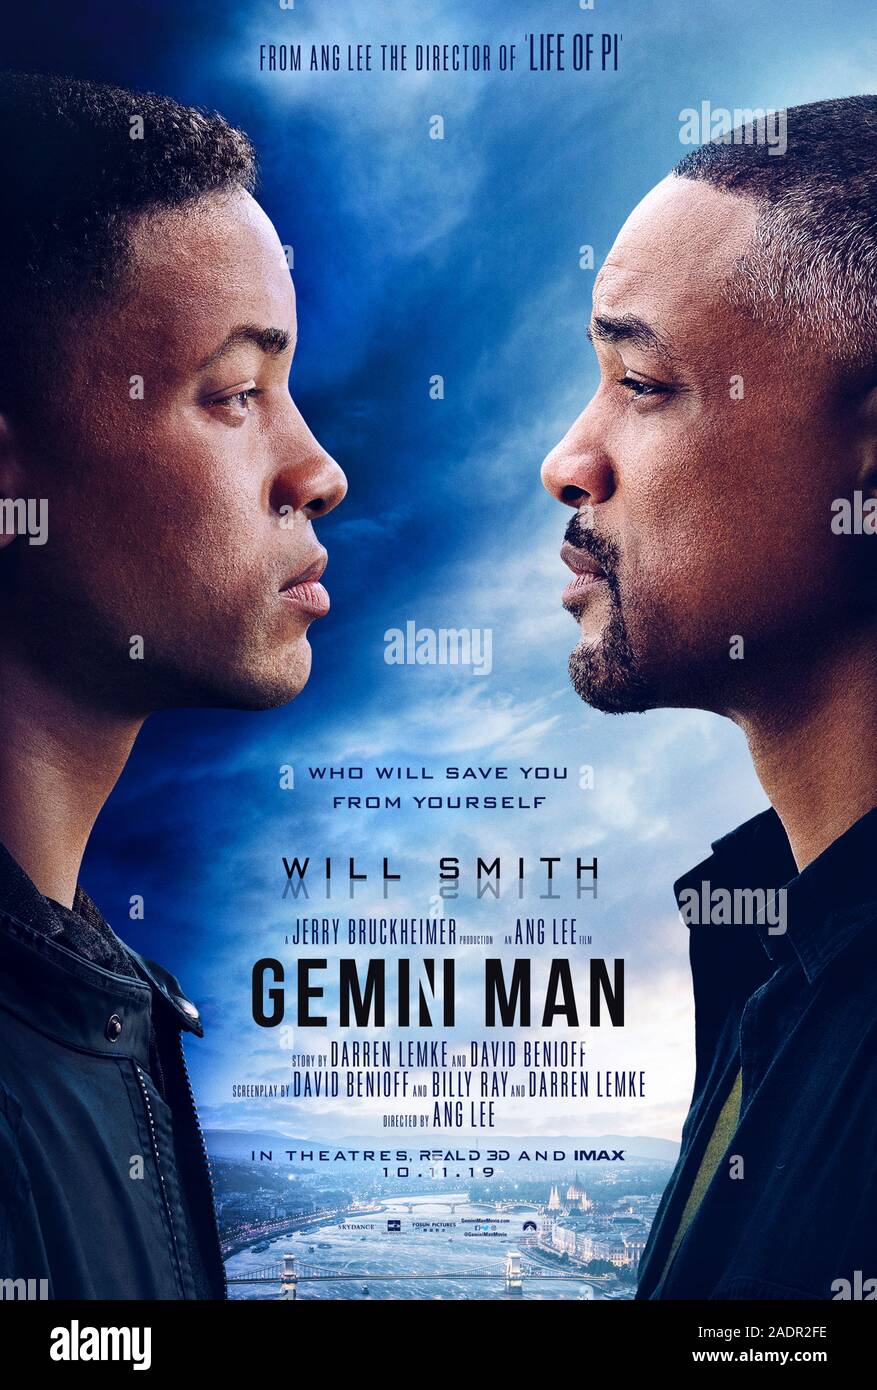 Gemini Man (2019) directed by Ang Lee and starring Will Smith, Mary Elizabeth Winstead and Clive Owen. An aging assassin is hunted down by a younger cloned version of himself. Stock Photo